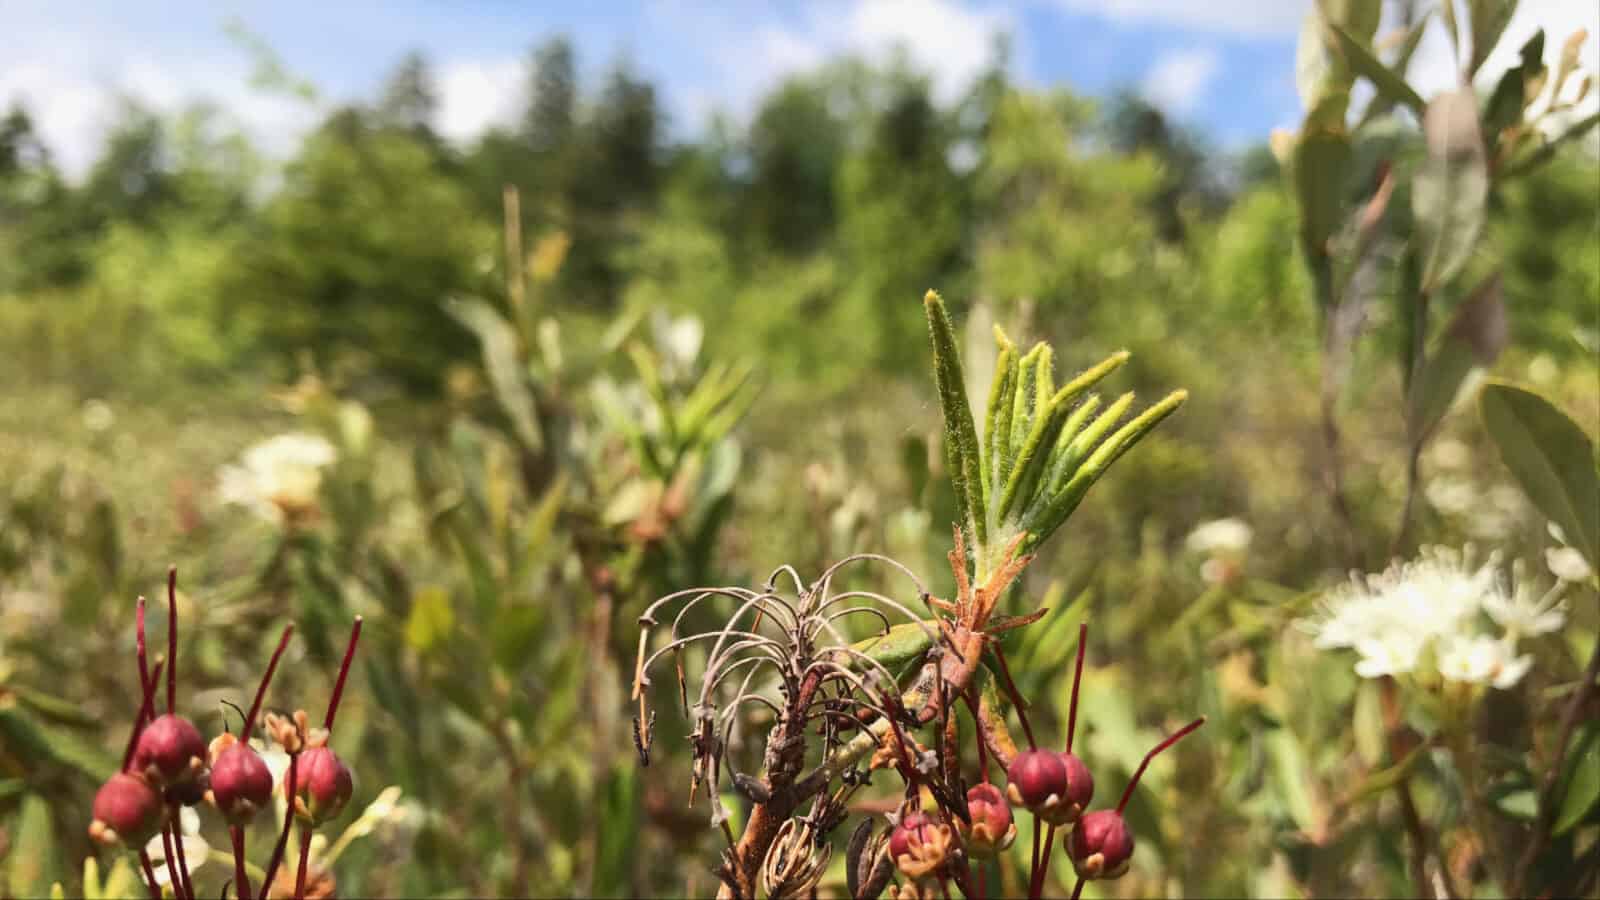 Red buds open into white bloom in Hawley bog on a sunny day in June.